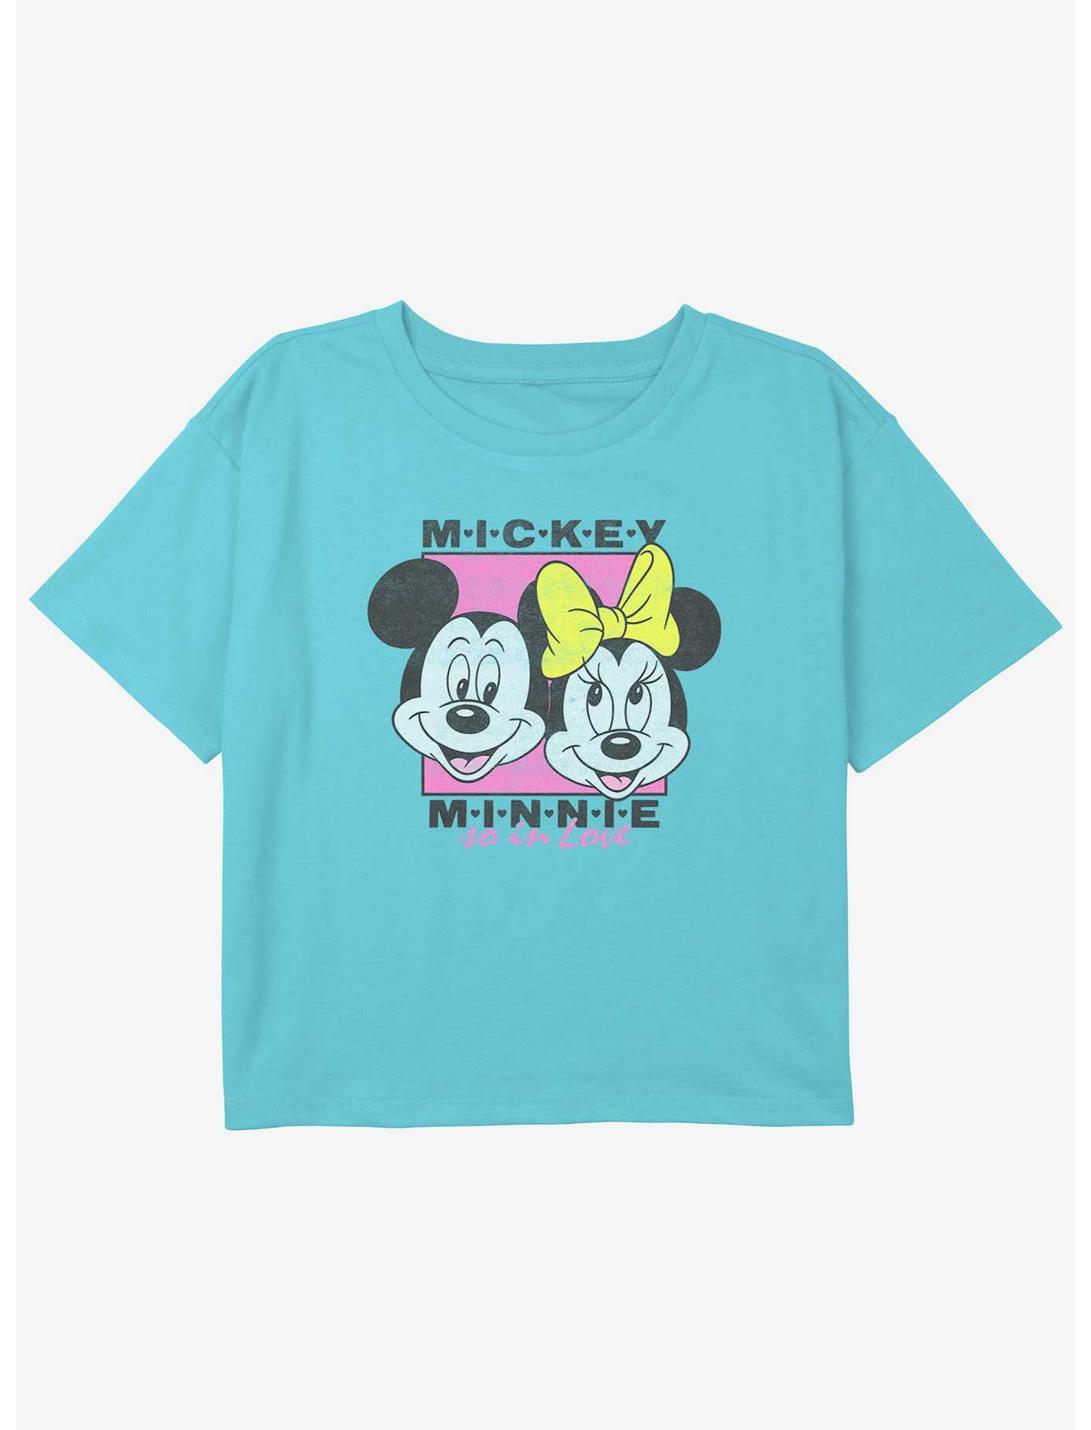 Disney Mickey Mouse Mickey And Minnie Girls Youth Crop T-Shirt, BLUE, hi-res